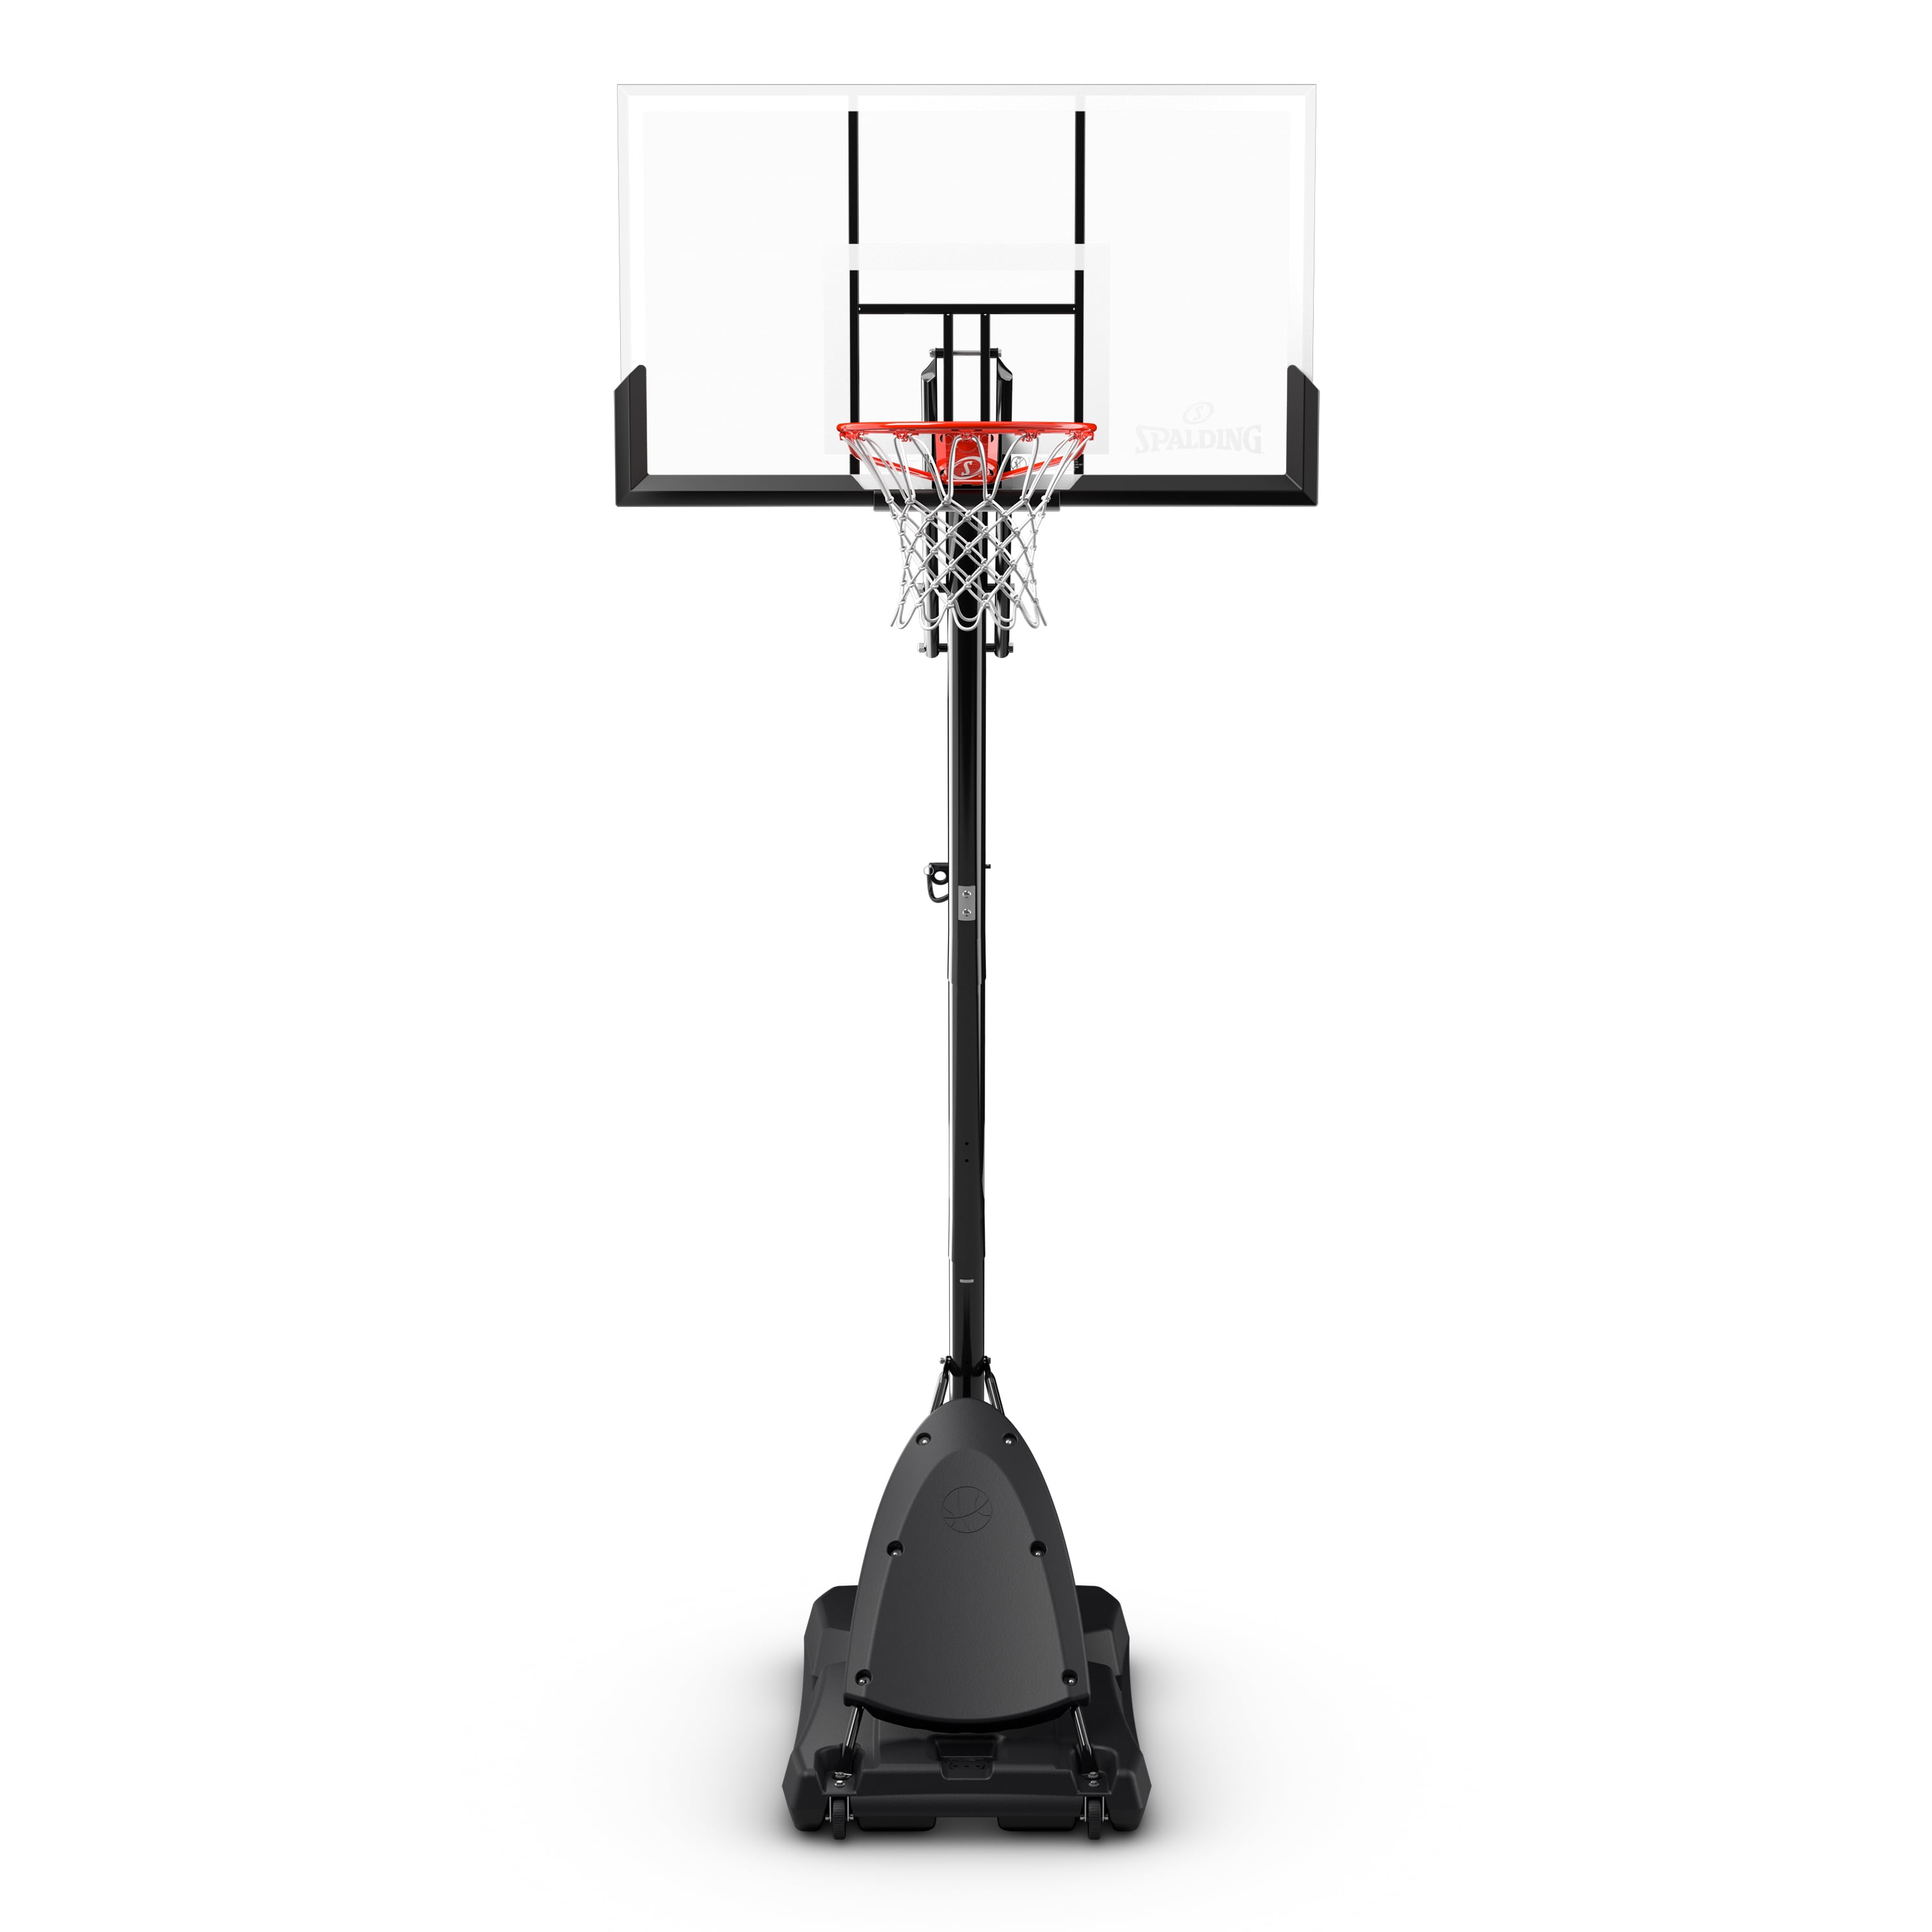 Details about   Spalding 54" Polycarbonate Portable Basketball Hoop 